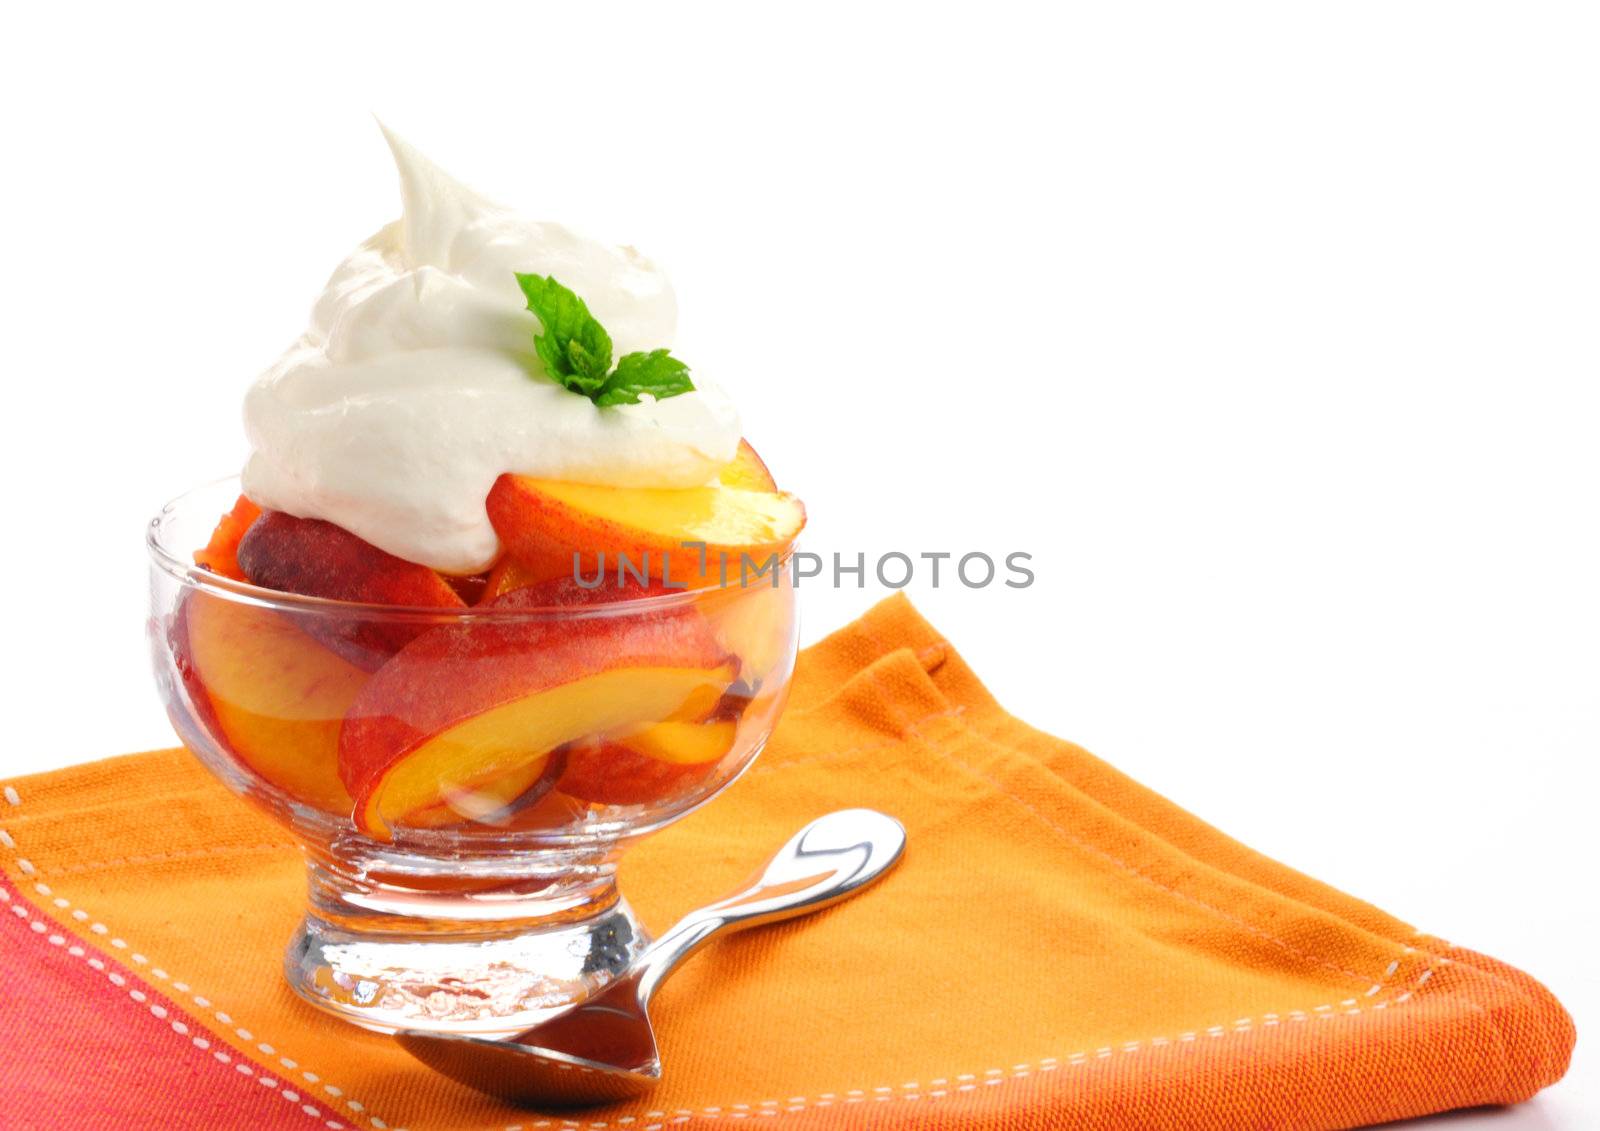 Fresh picked peaches served with whipped cream.